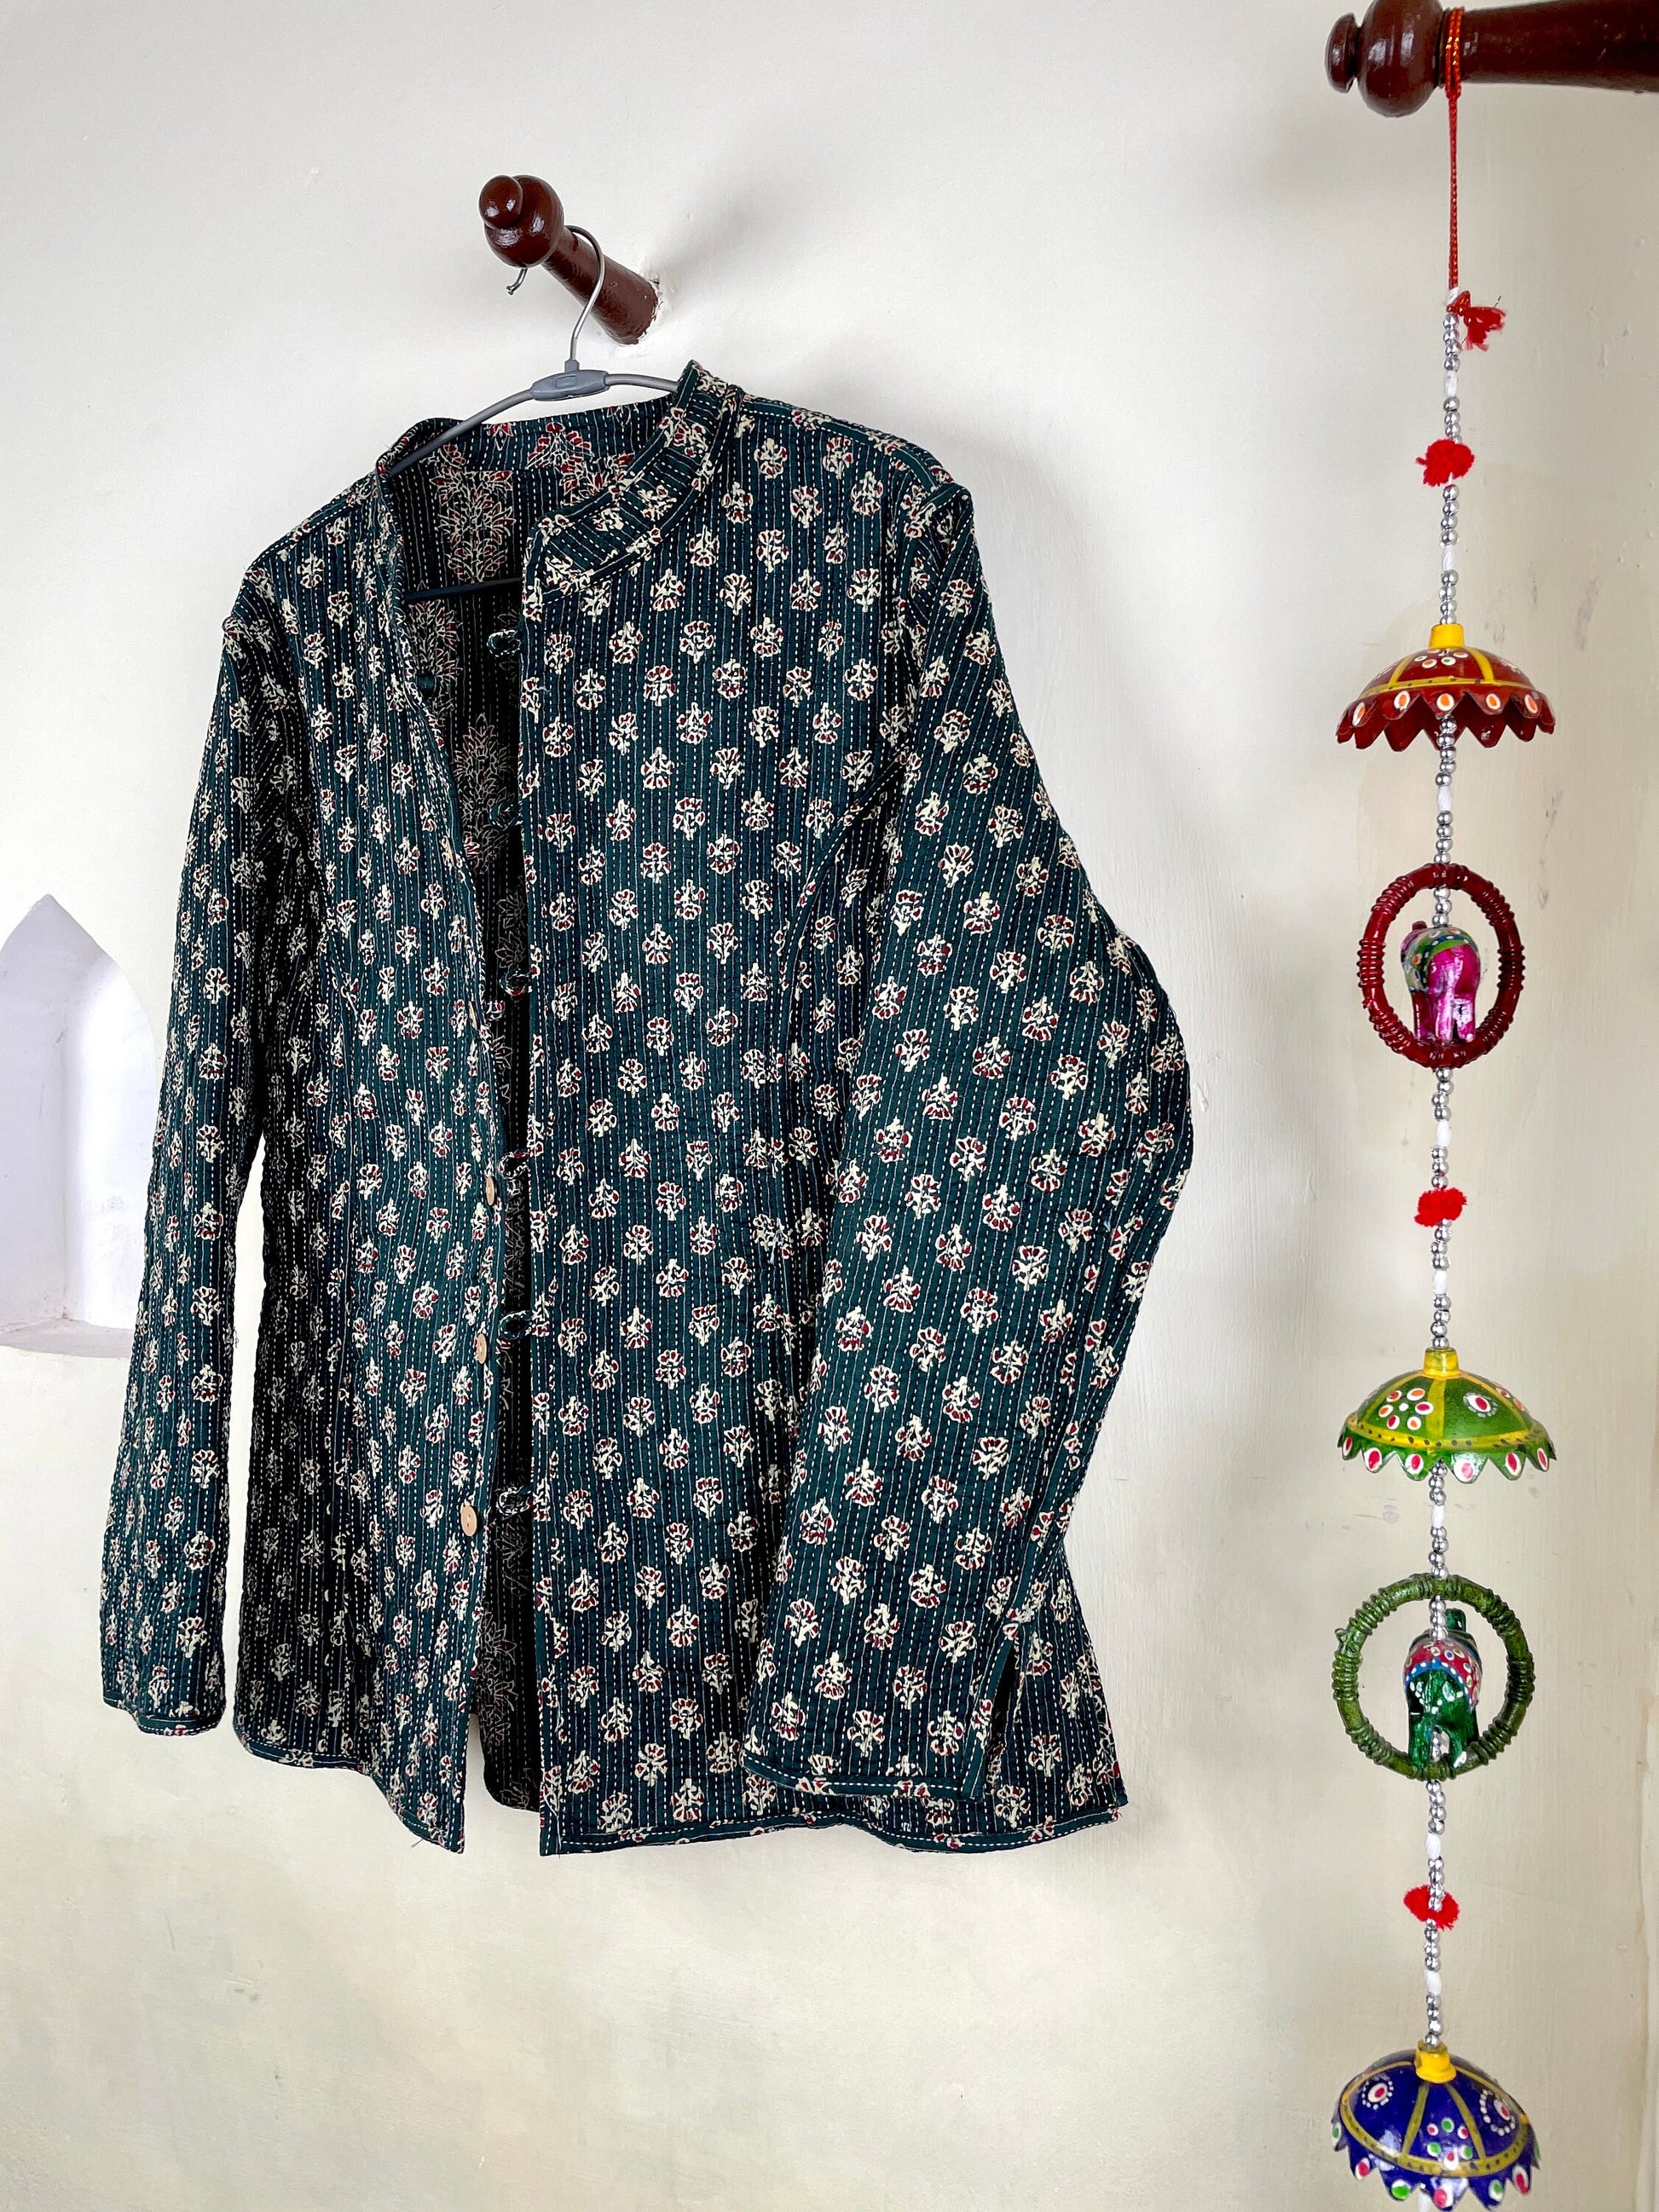 Indian Handmade Quilted Kantha Cotton Fabric Jacket Stylish Green Floral Women's Coat, Reversible Waistcoat for Her